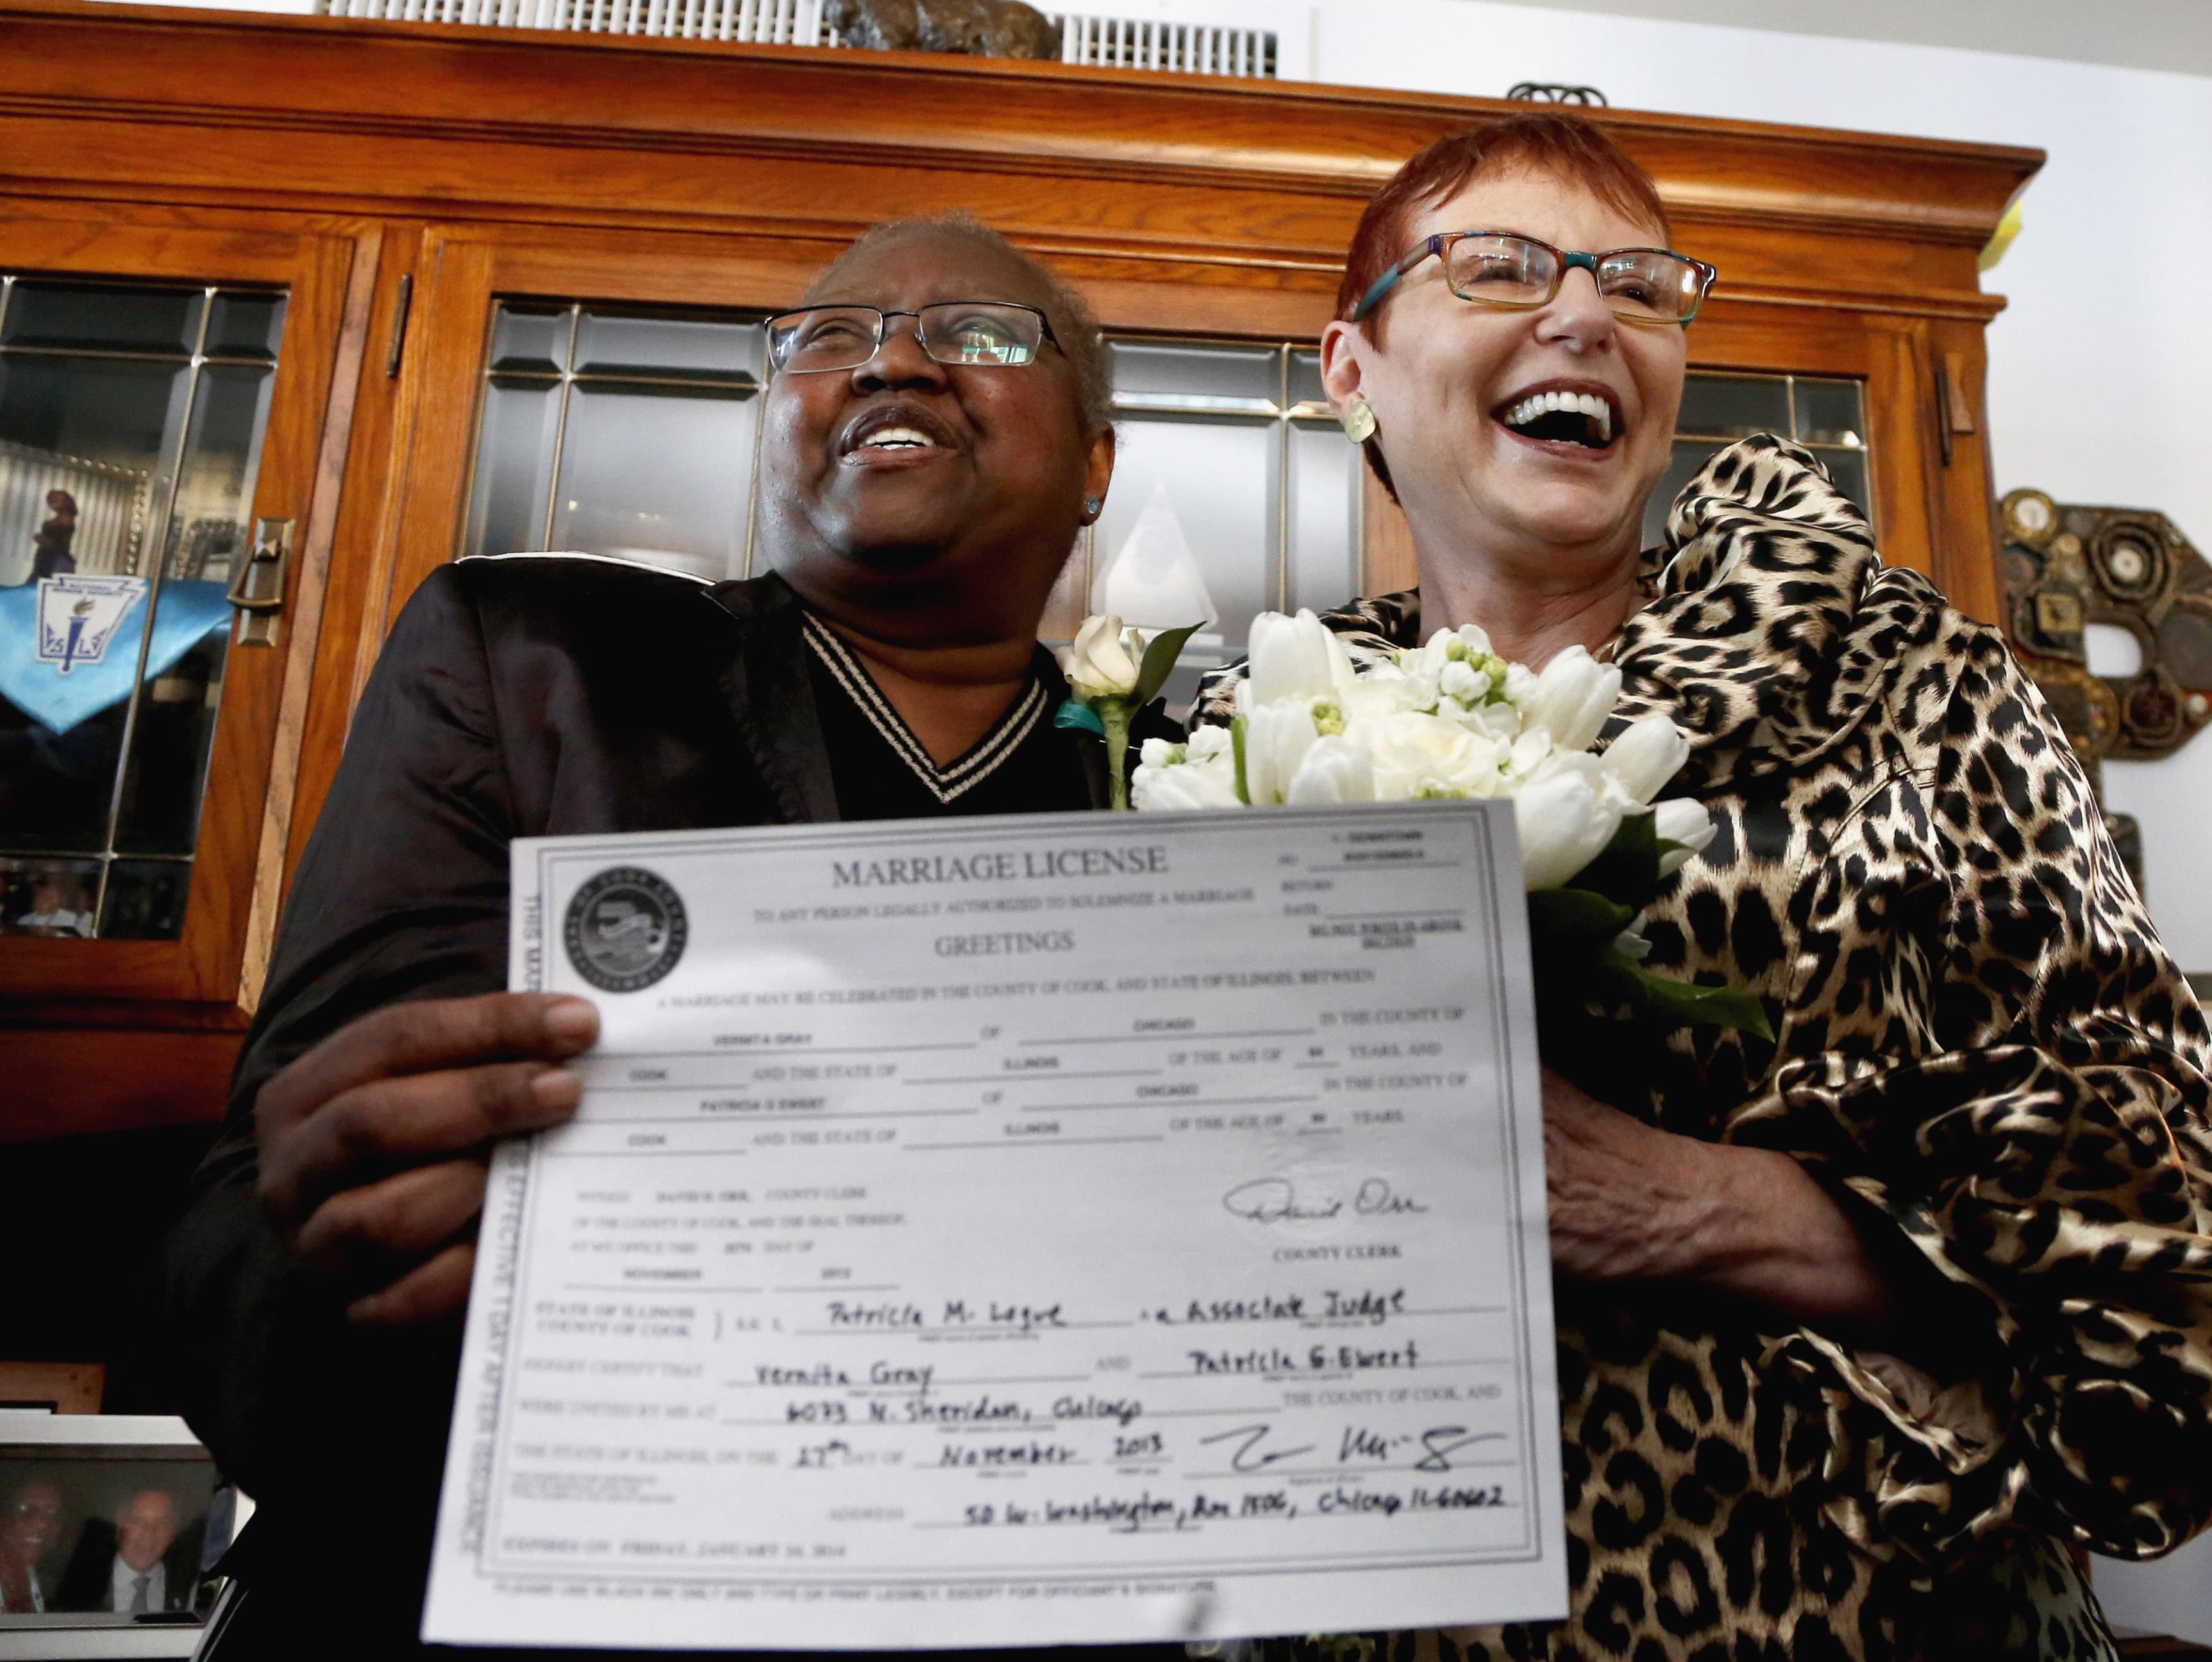 n this Nov. 27, 2013 file photo, Vernita Gray and Patricia Ewert hold their Illinois marriage license at their home in Chicago following their marriage by a Cook County judge. They were granted an exception to marry before Illinois' law formally